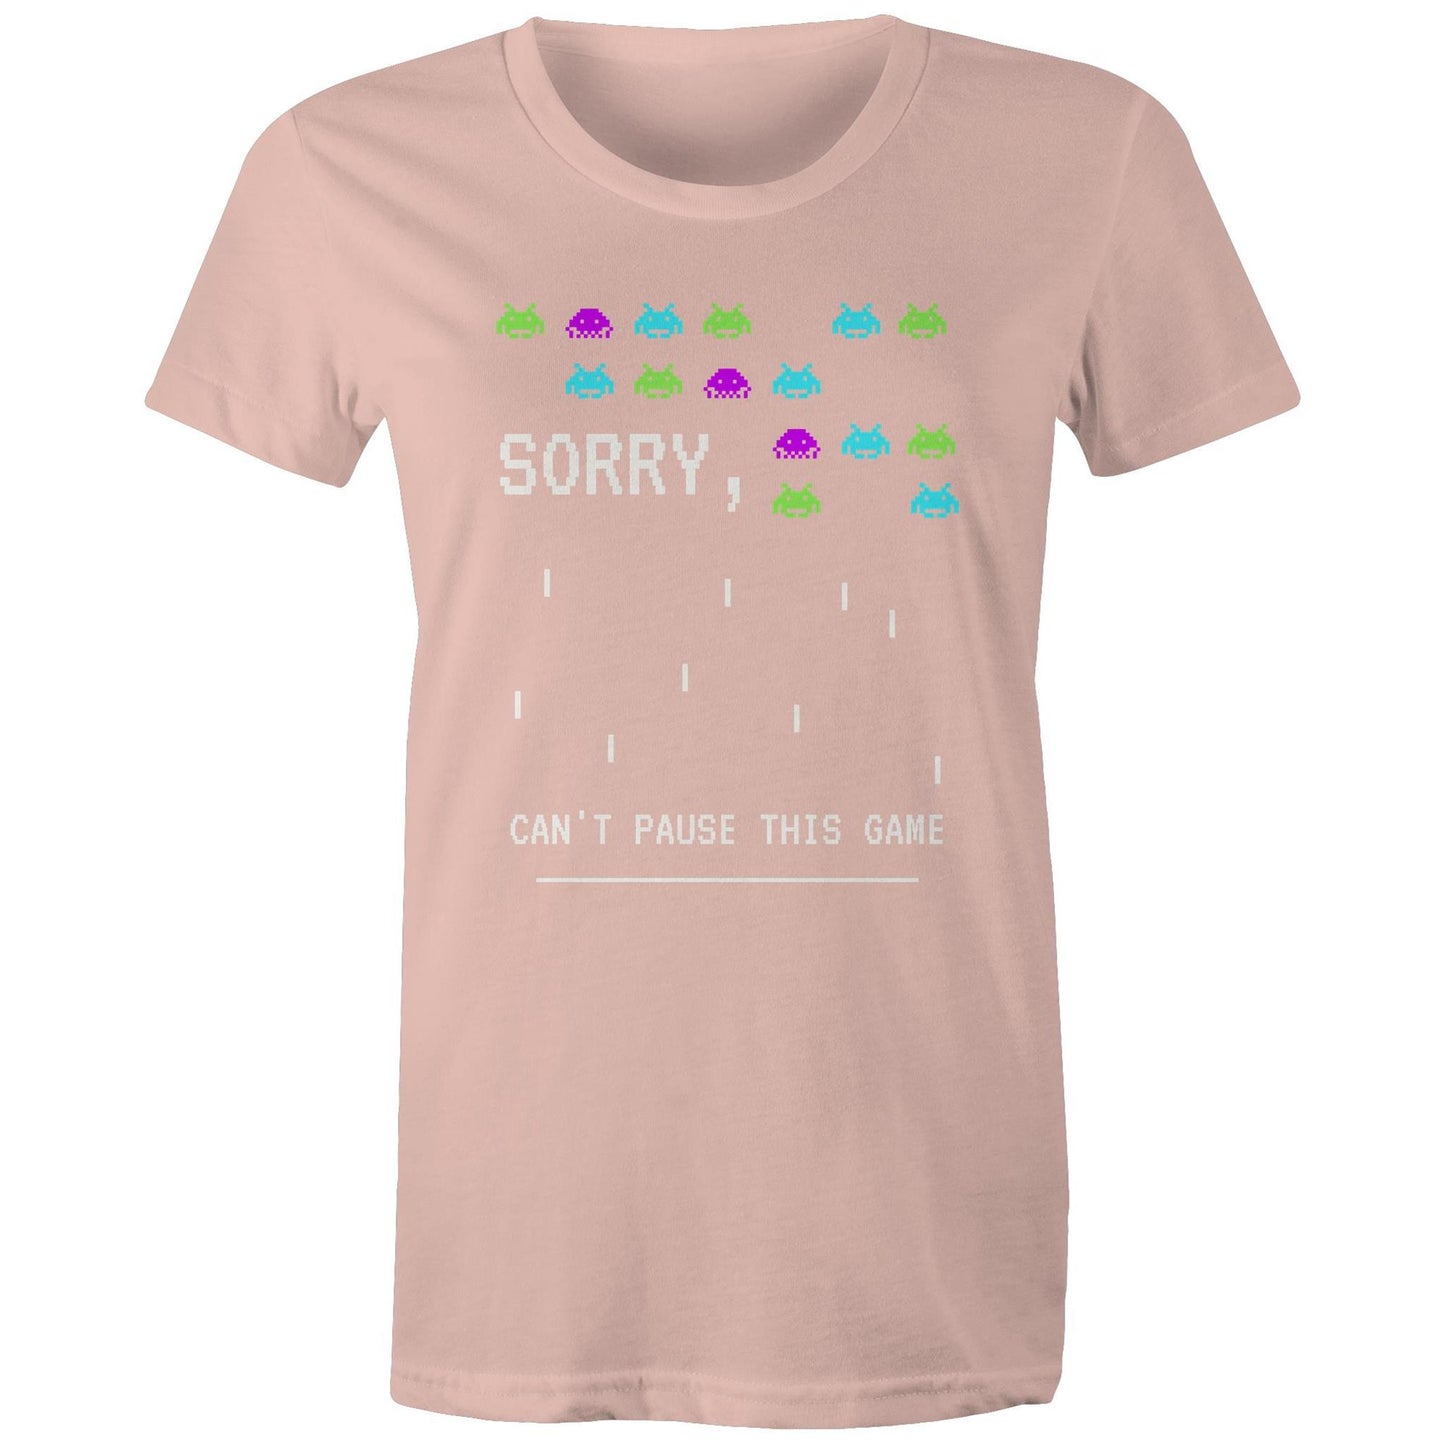 Sorry, Can't Pause This Game - Womens T-shirt Pale Pink Womens T-shirt Games